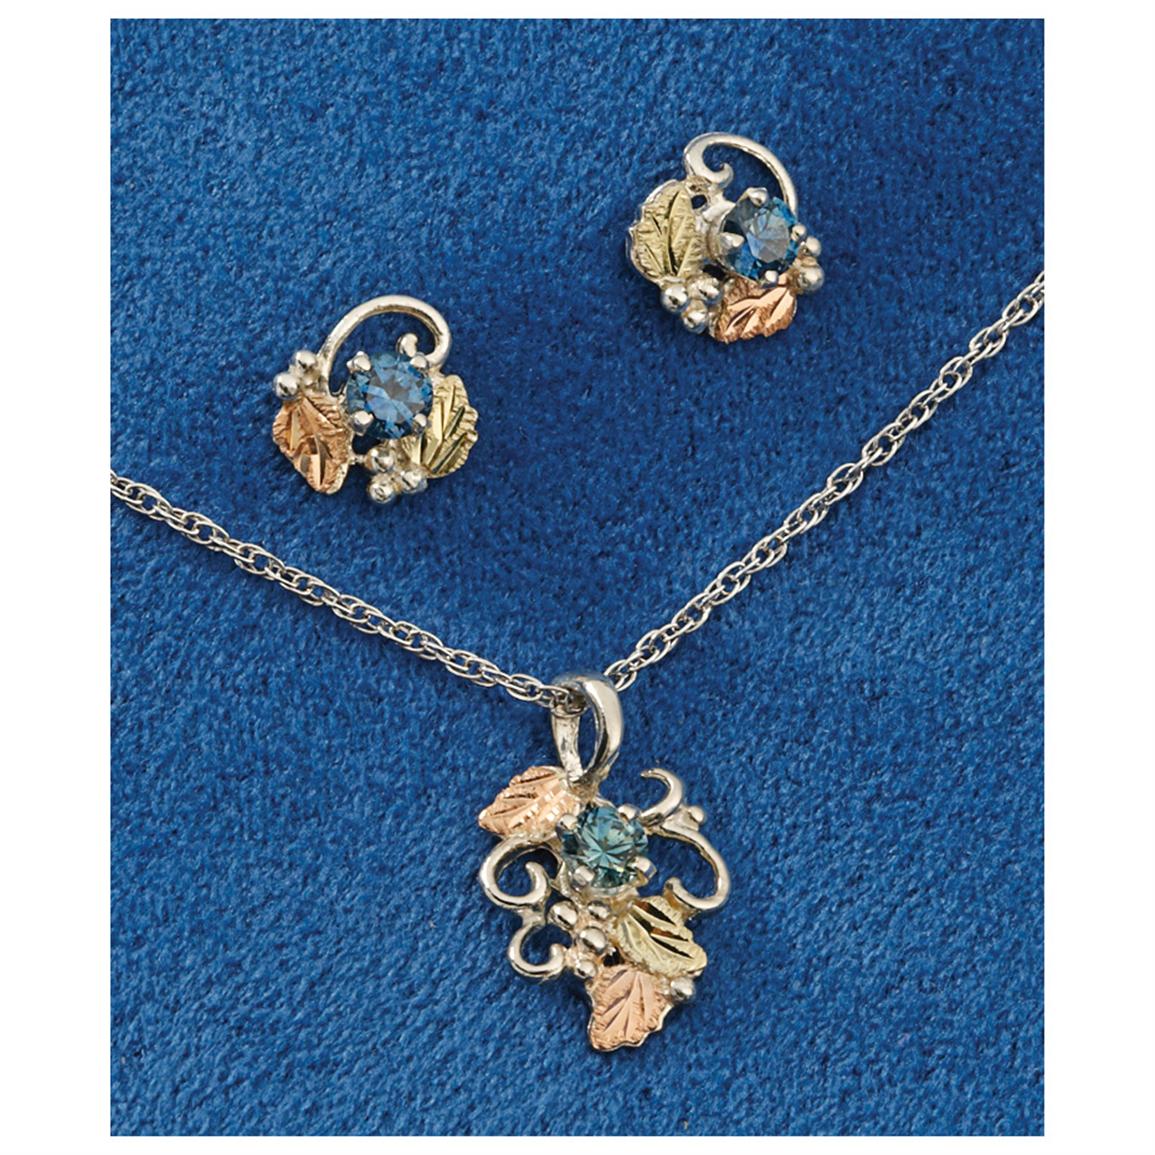 Landstrom's® Black Hills Gold Sapphire Necklace - 421146, Jewelry at